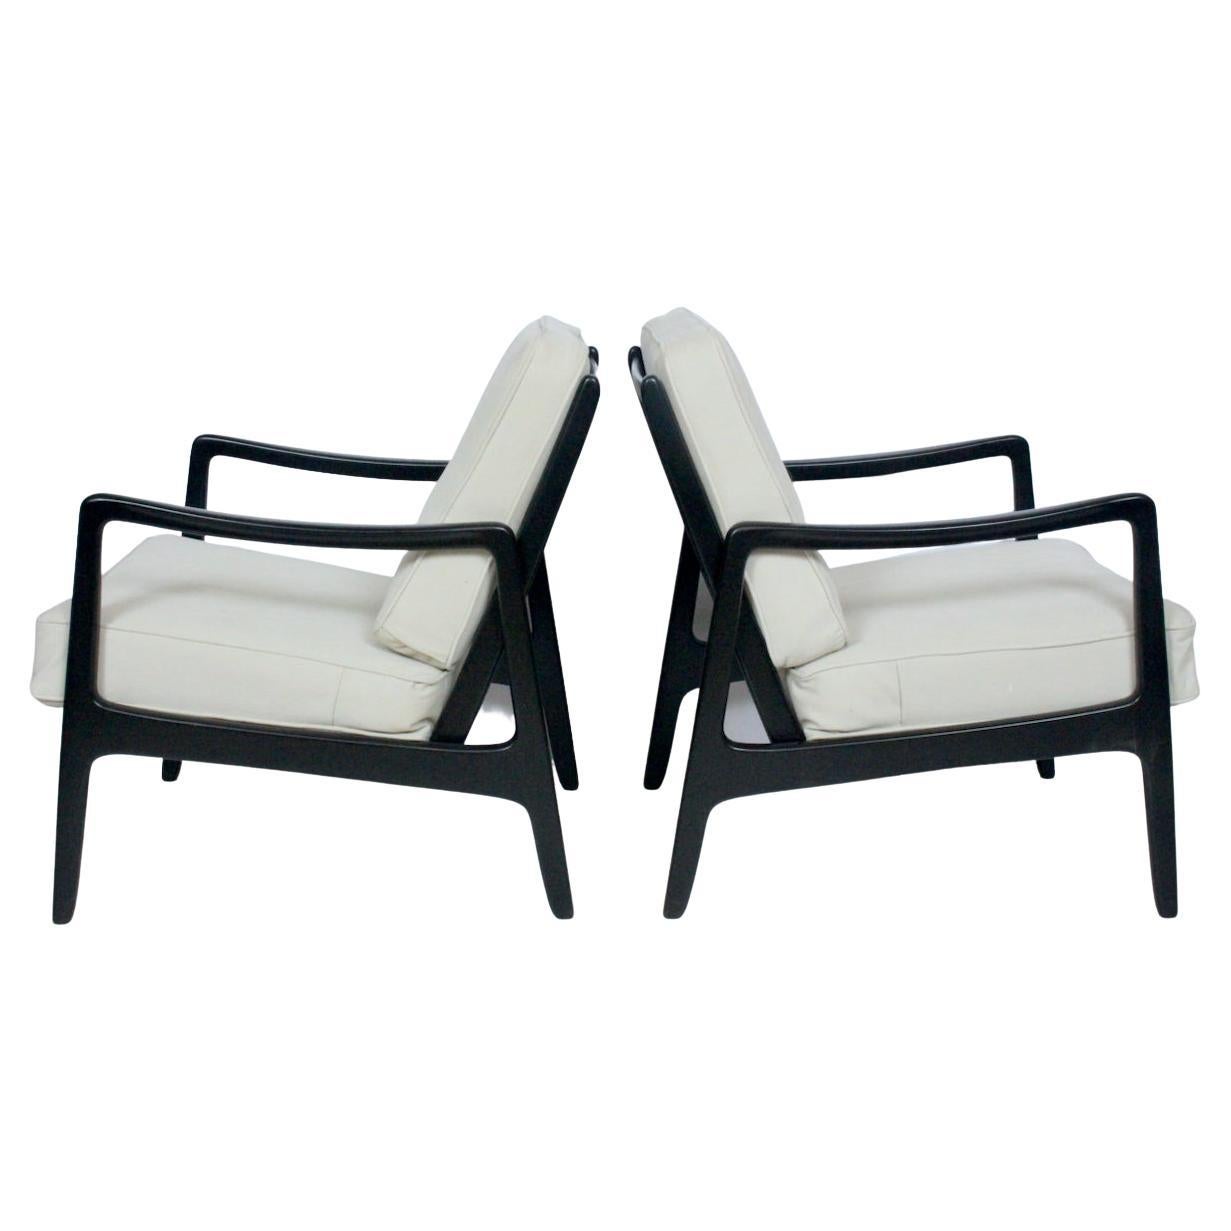 Early Pair of Ole Wanscher Ebonized Mahogany Lounge Chairs, 1950's